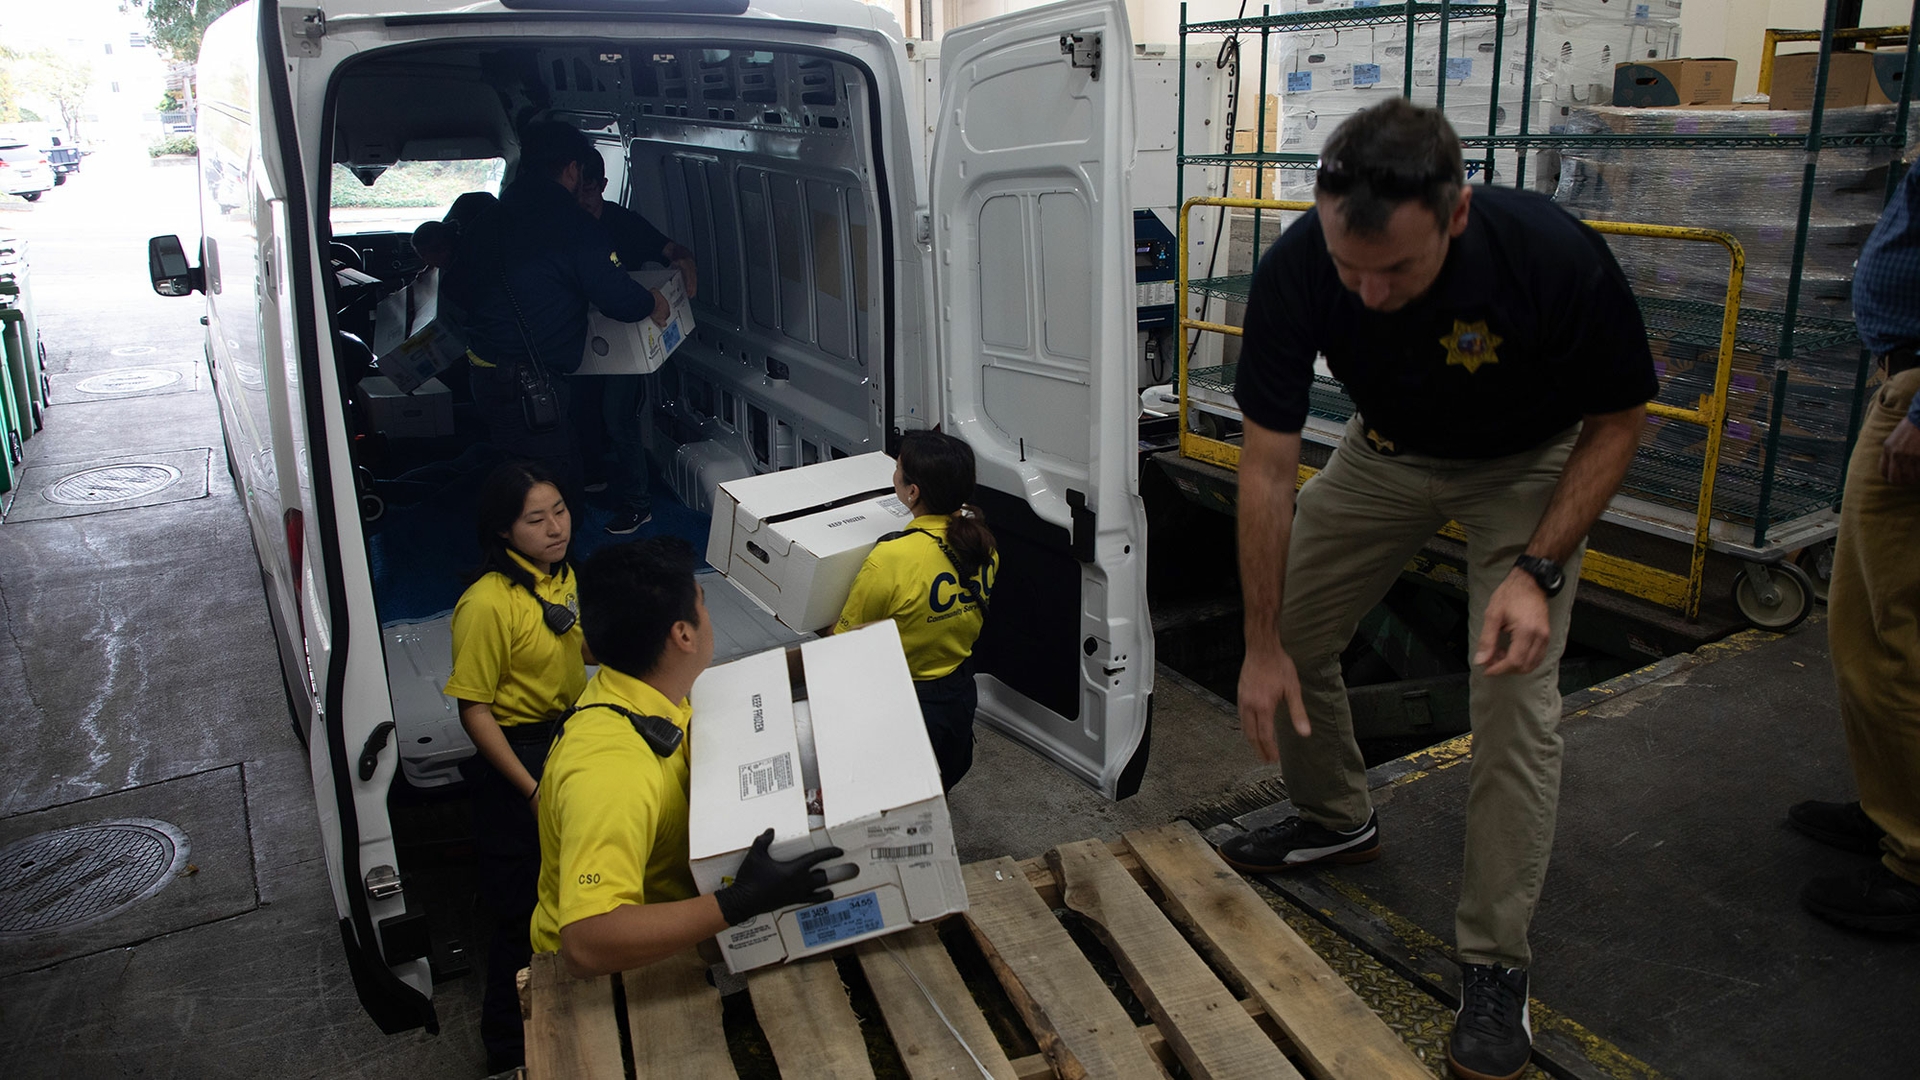 A photo shows volunteers loading boxes of produce into the back of a van.